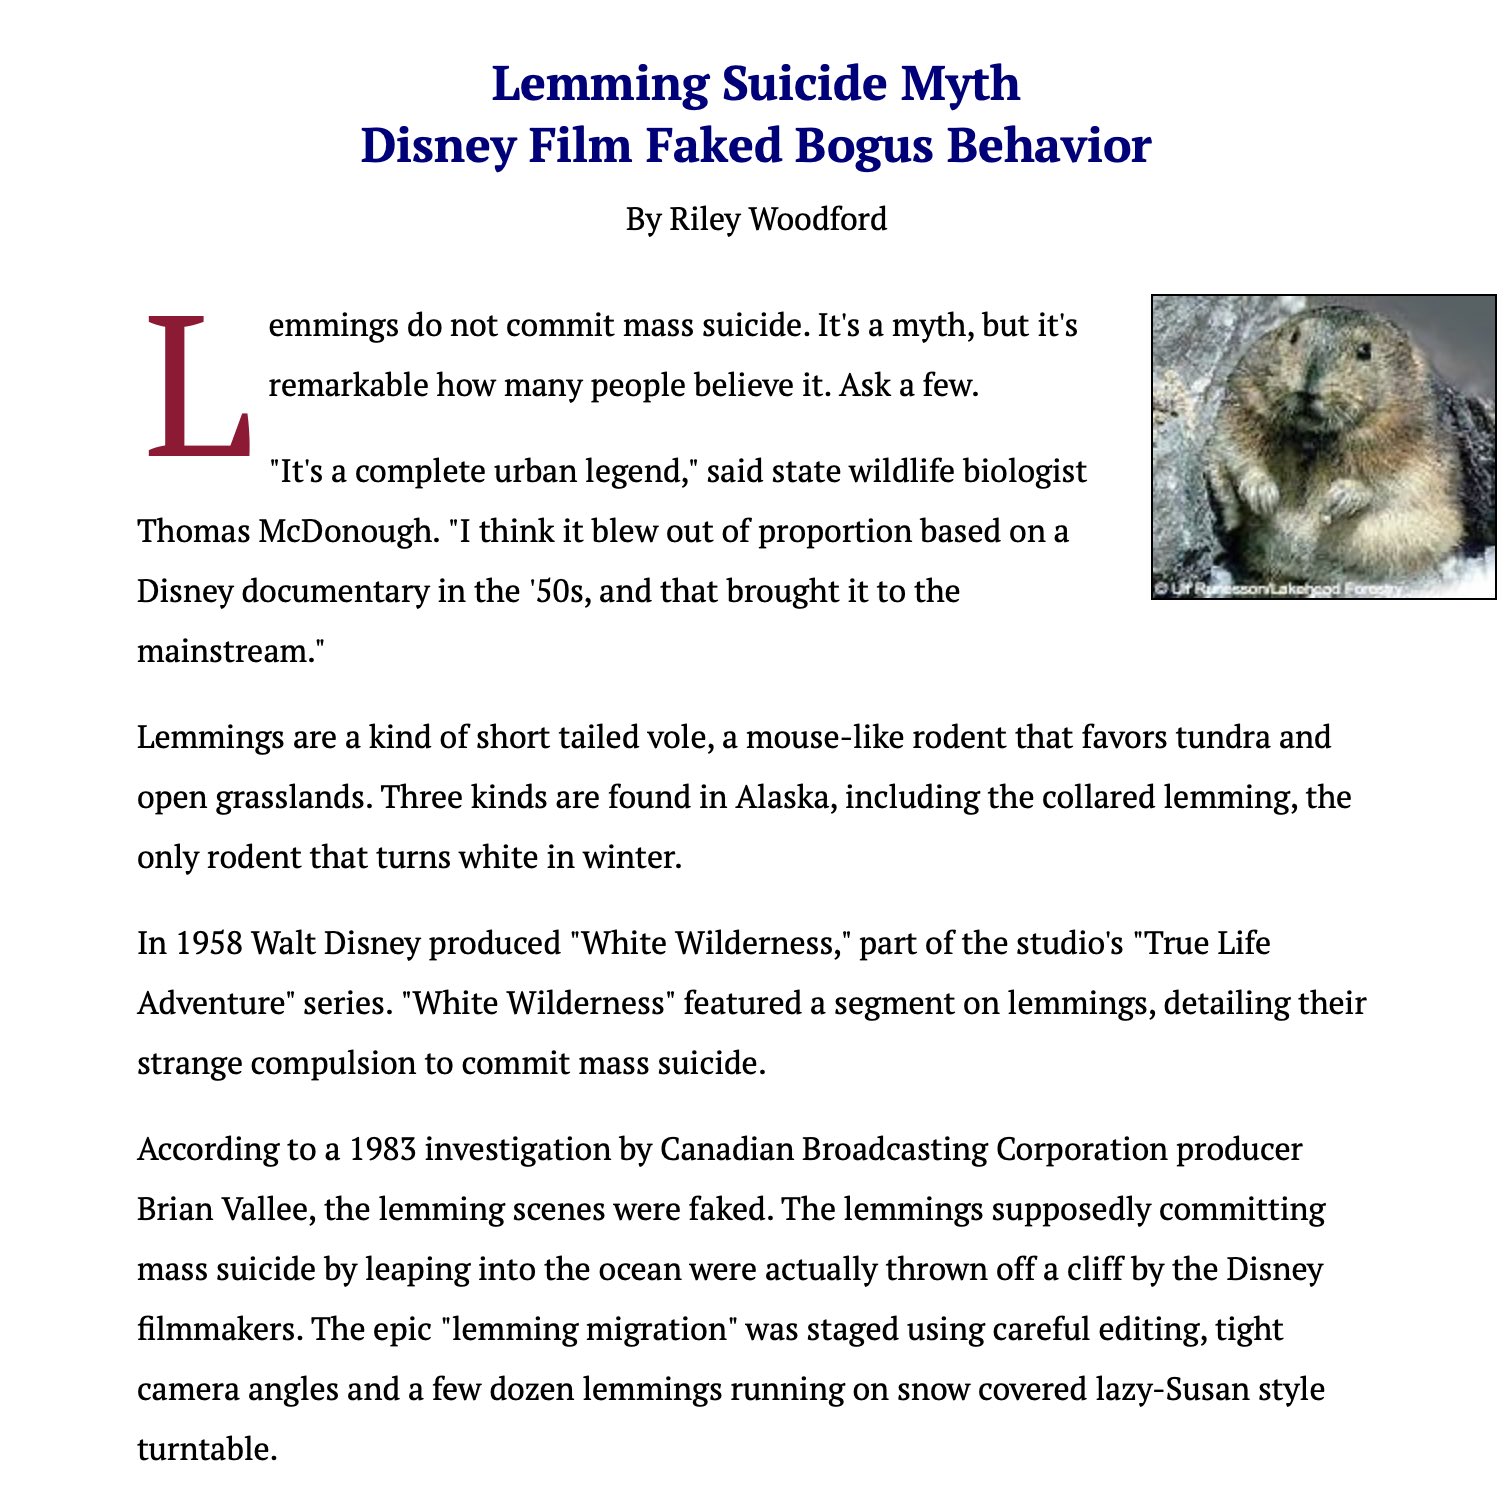 Do Lemmings Really Commit Mass Suicide?